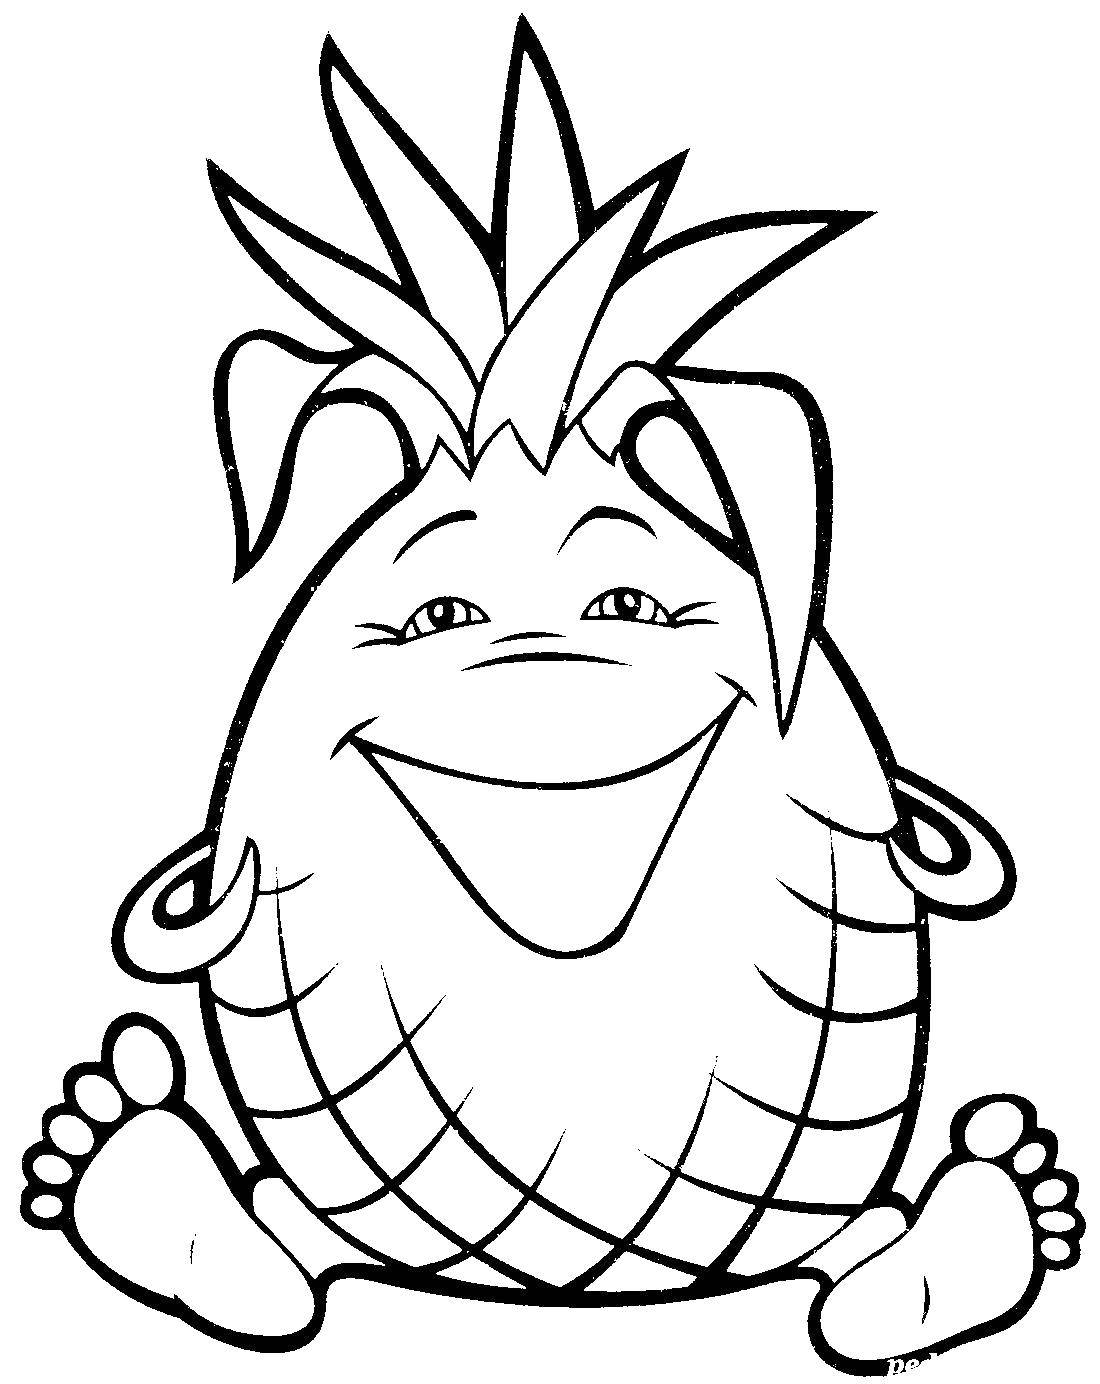 Coloring Funny pineapple. Category pineapple. Tags:  Fruit, pineapple.